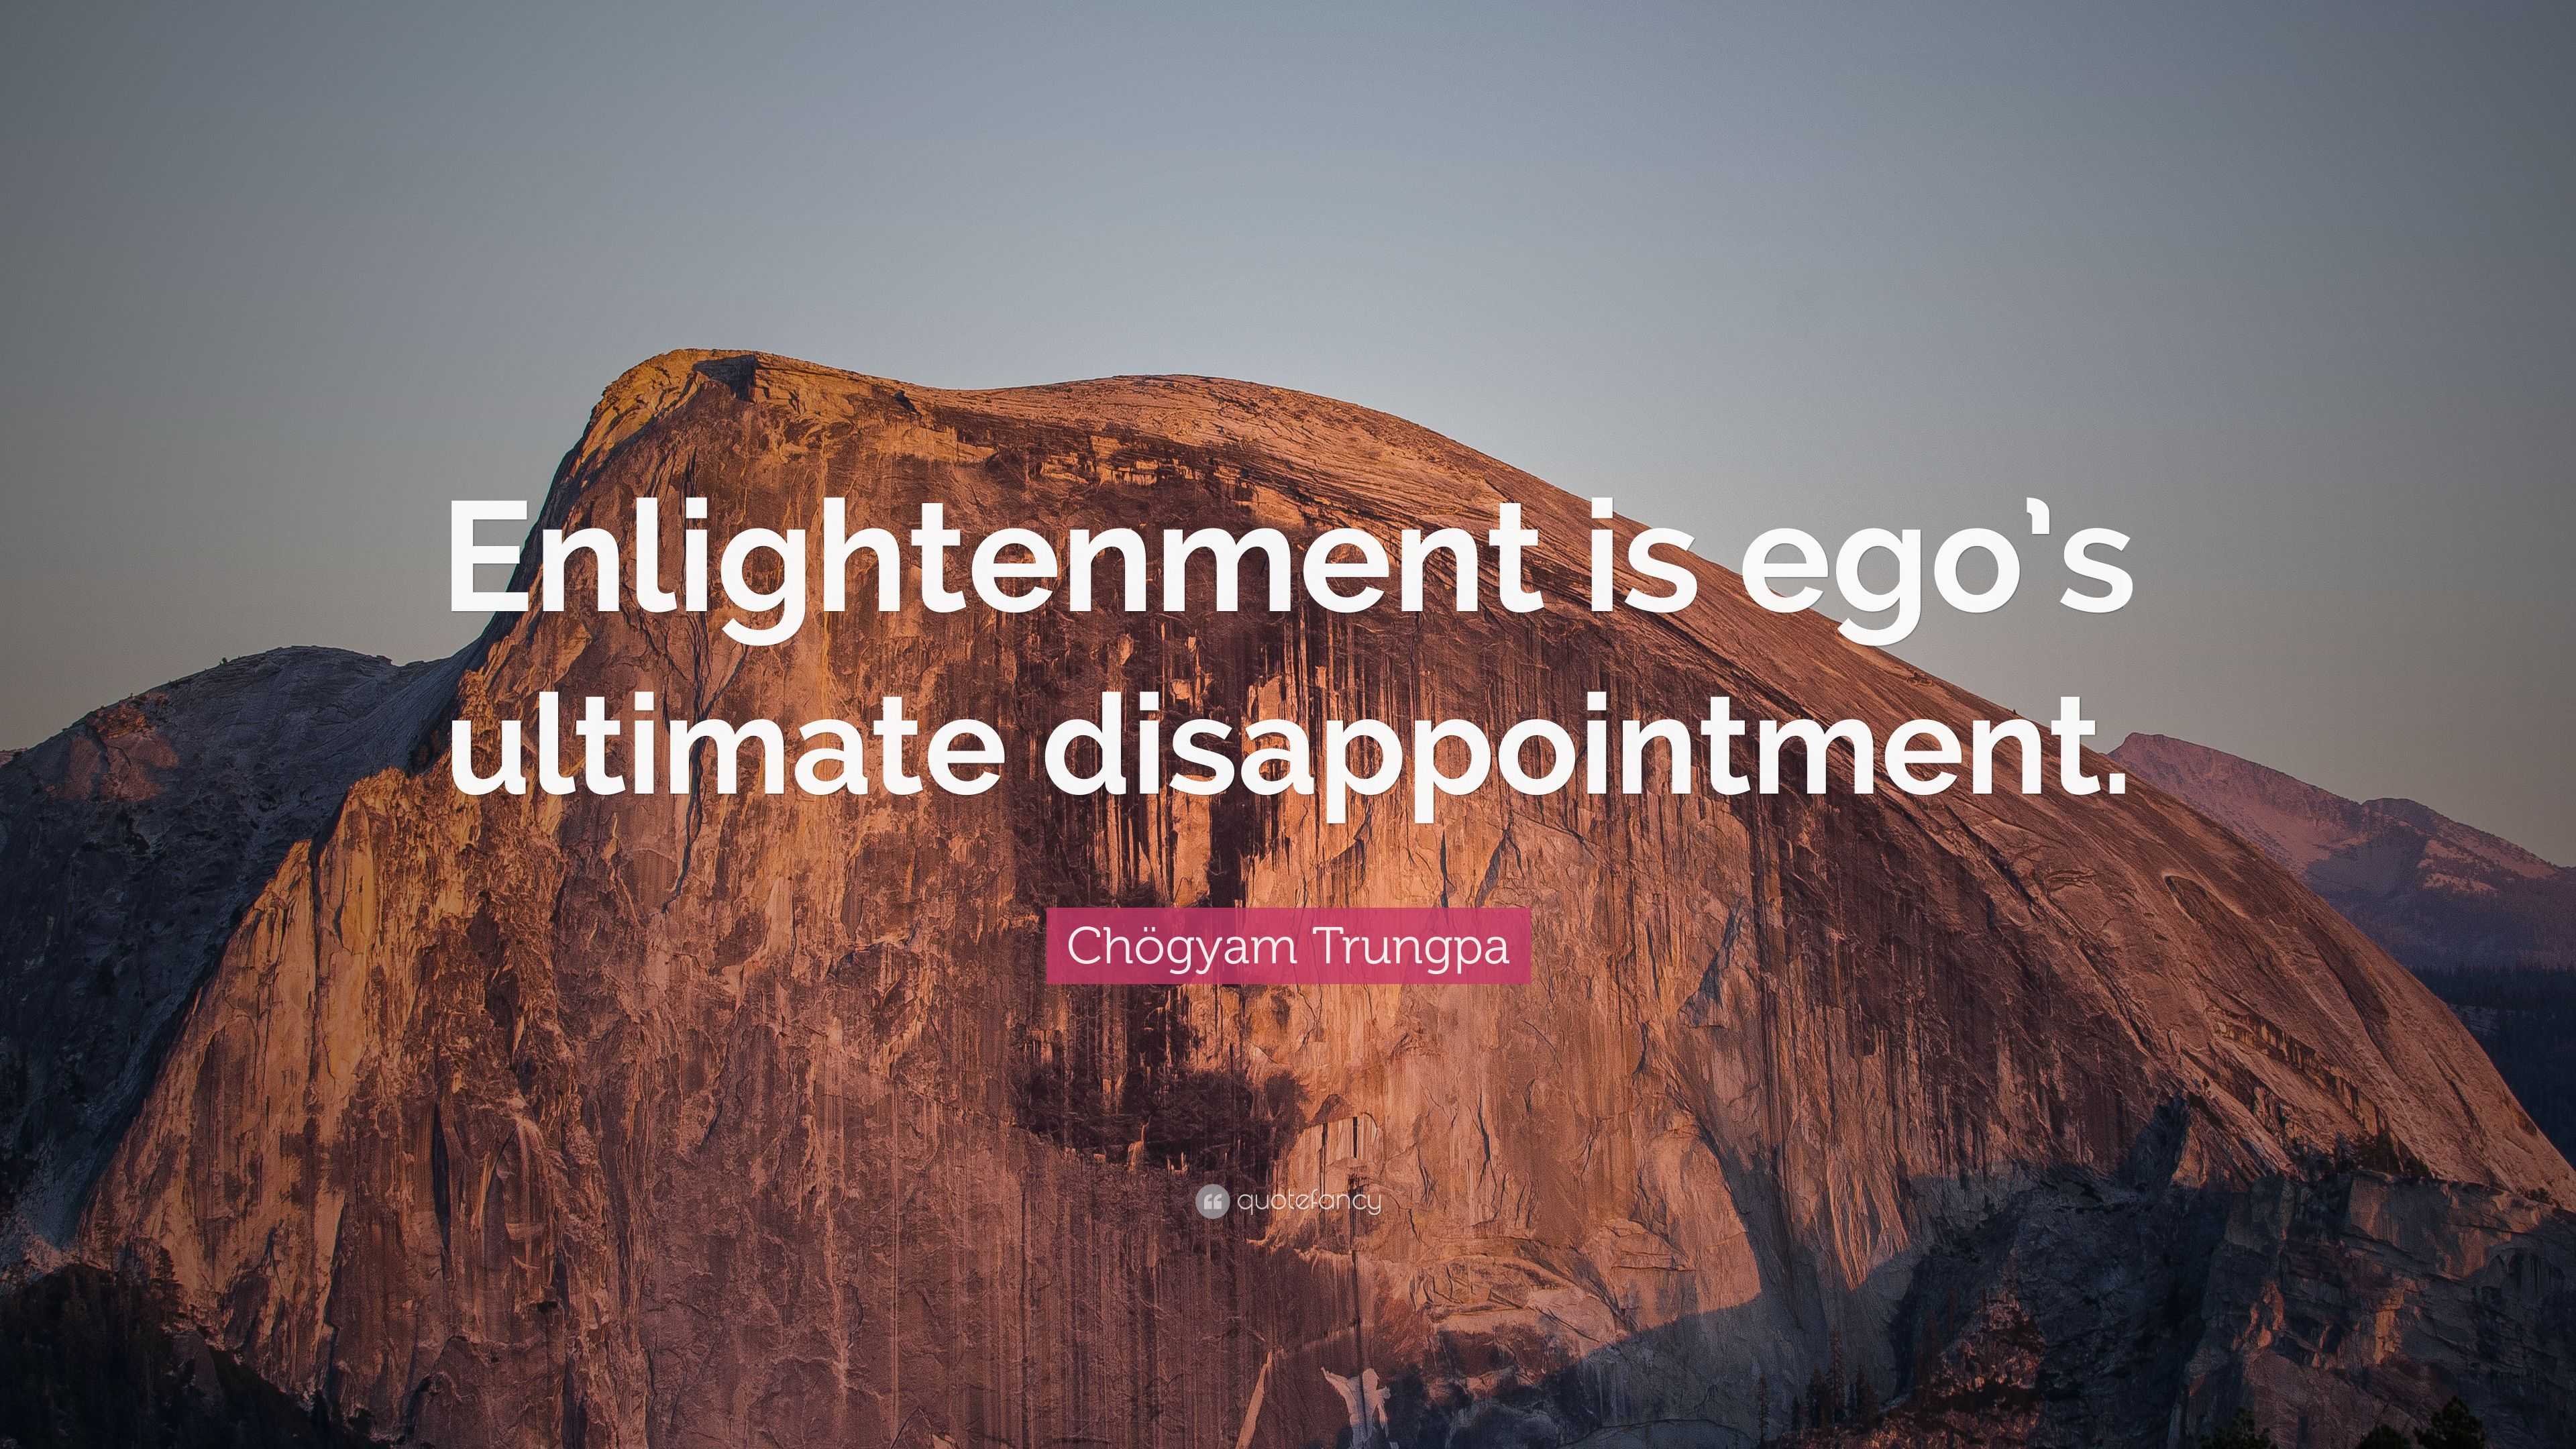 Chögyam Trungpa Quote: “The attainment of enlightenment from ego's